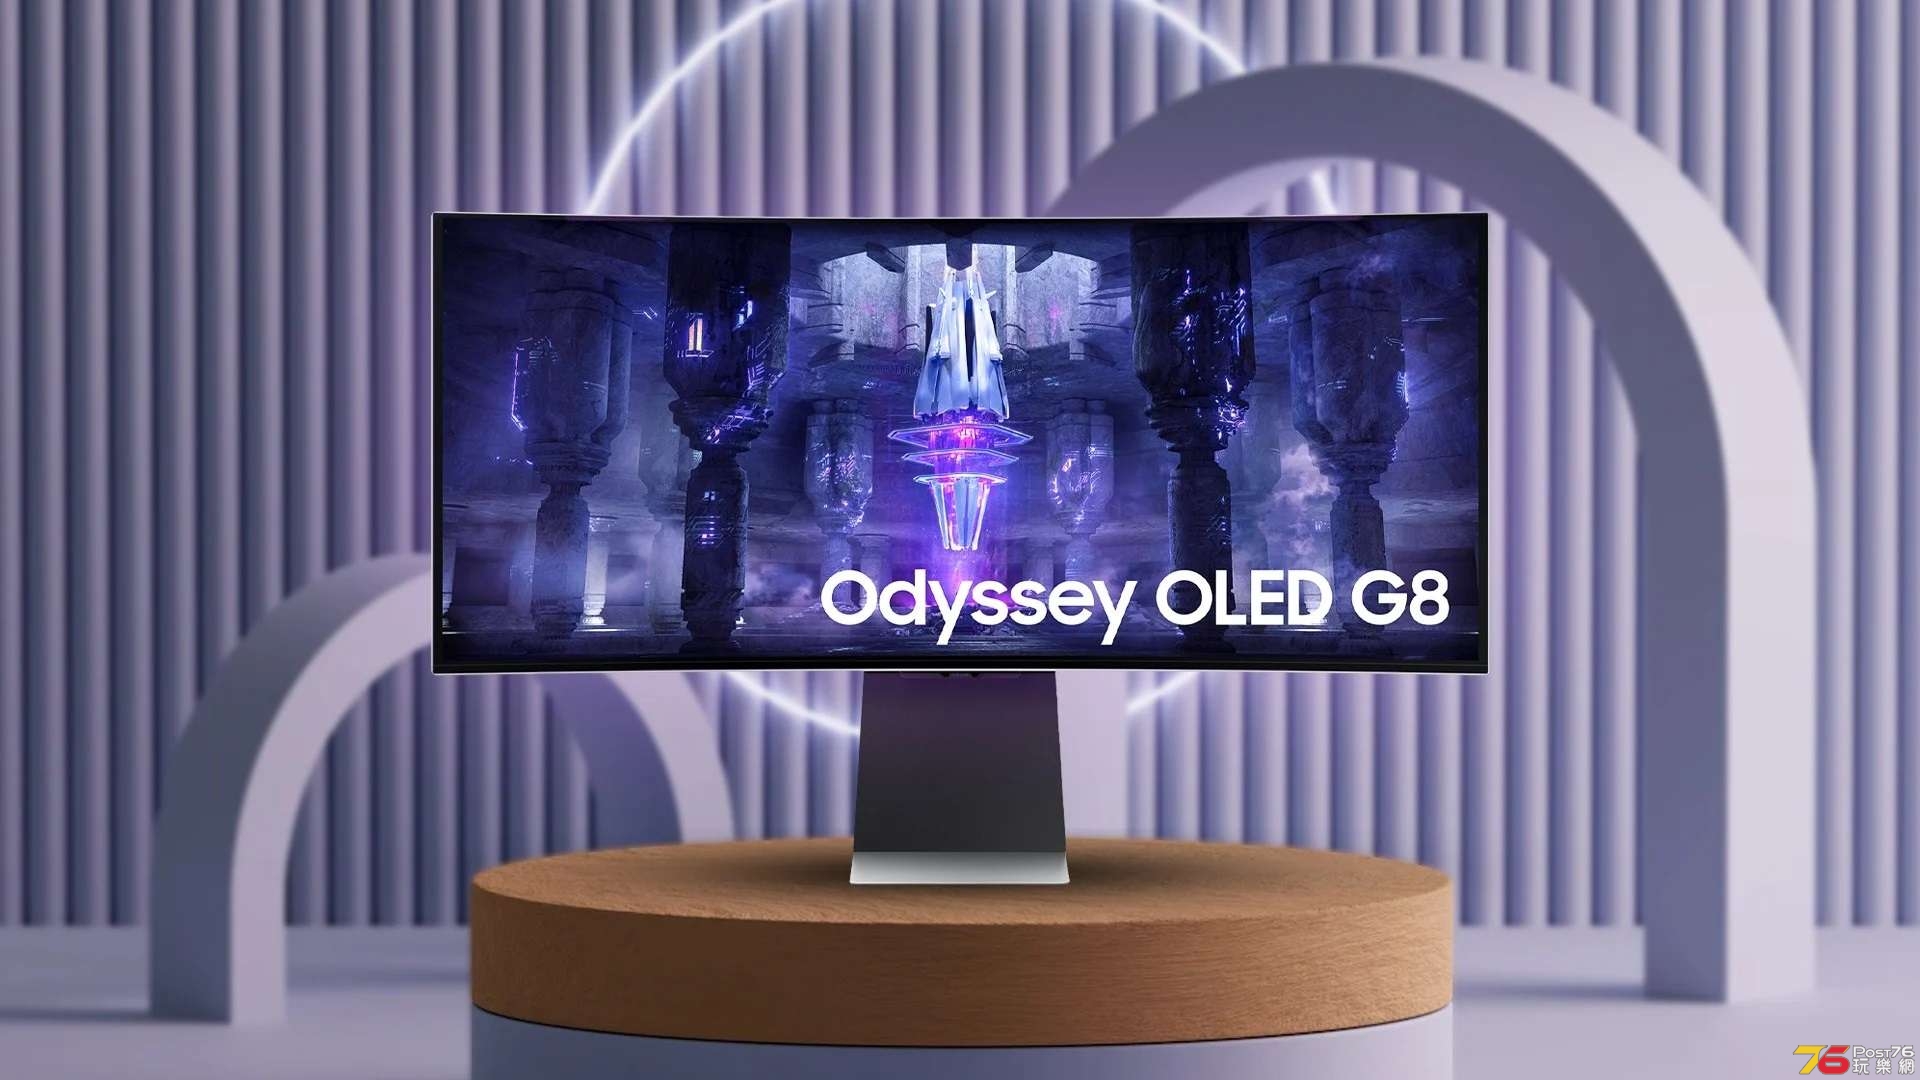 1662020383_Samsung-announces-Odyssey-OLED-G8-gaming-monitor-with-175-Hz.jpg